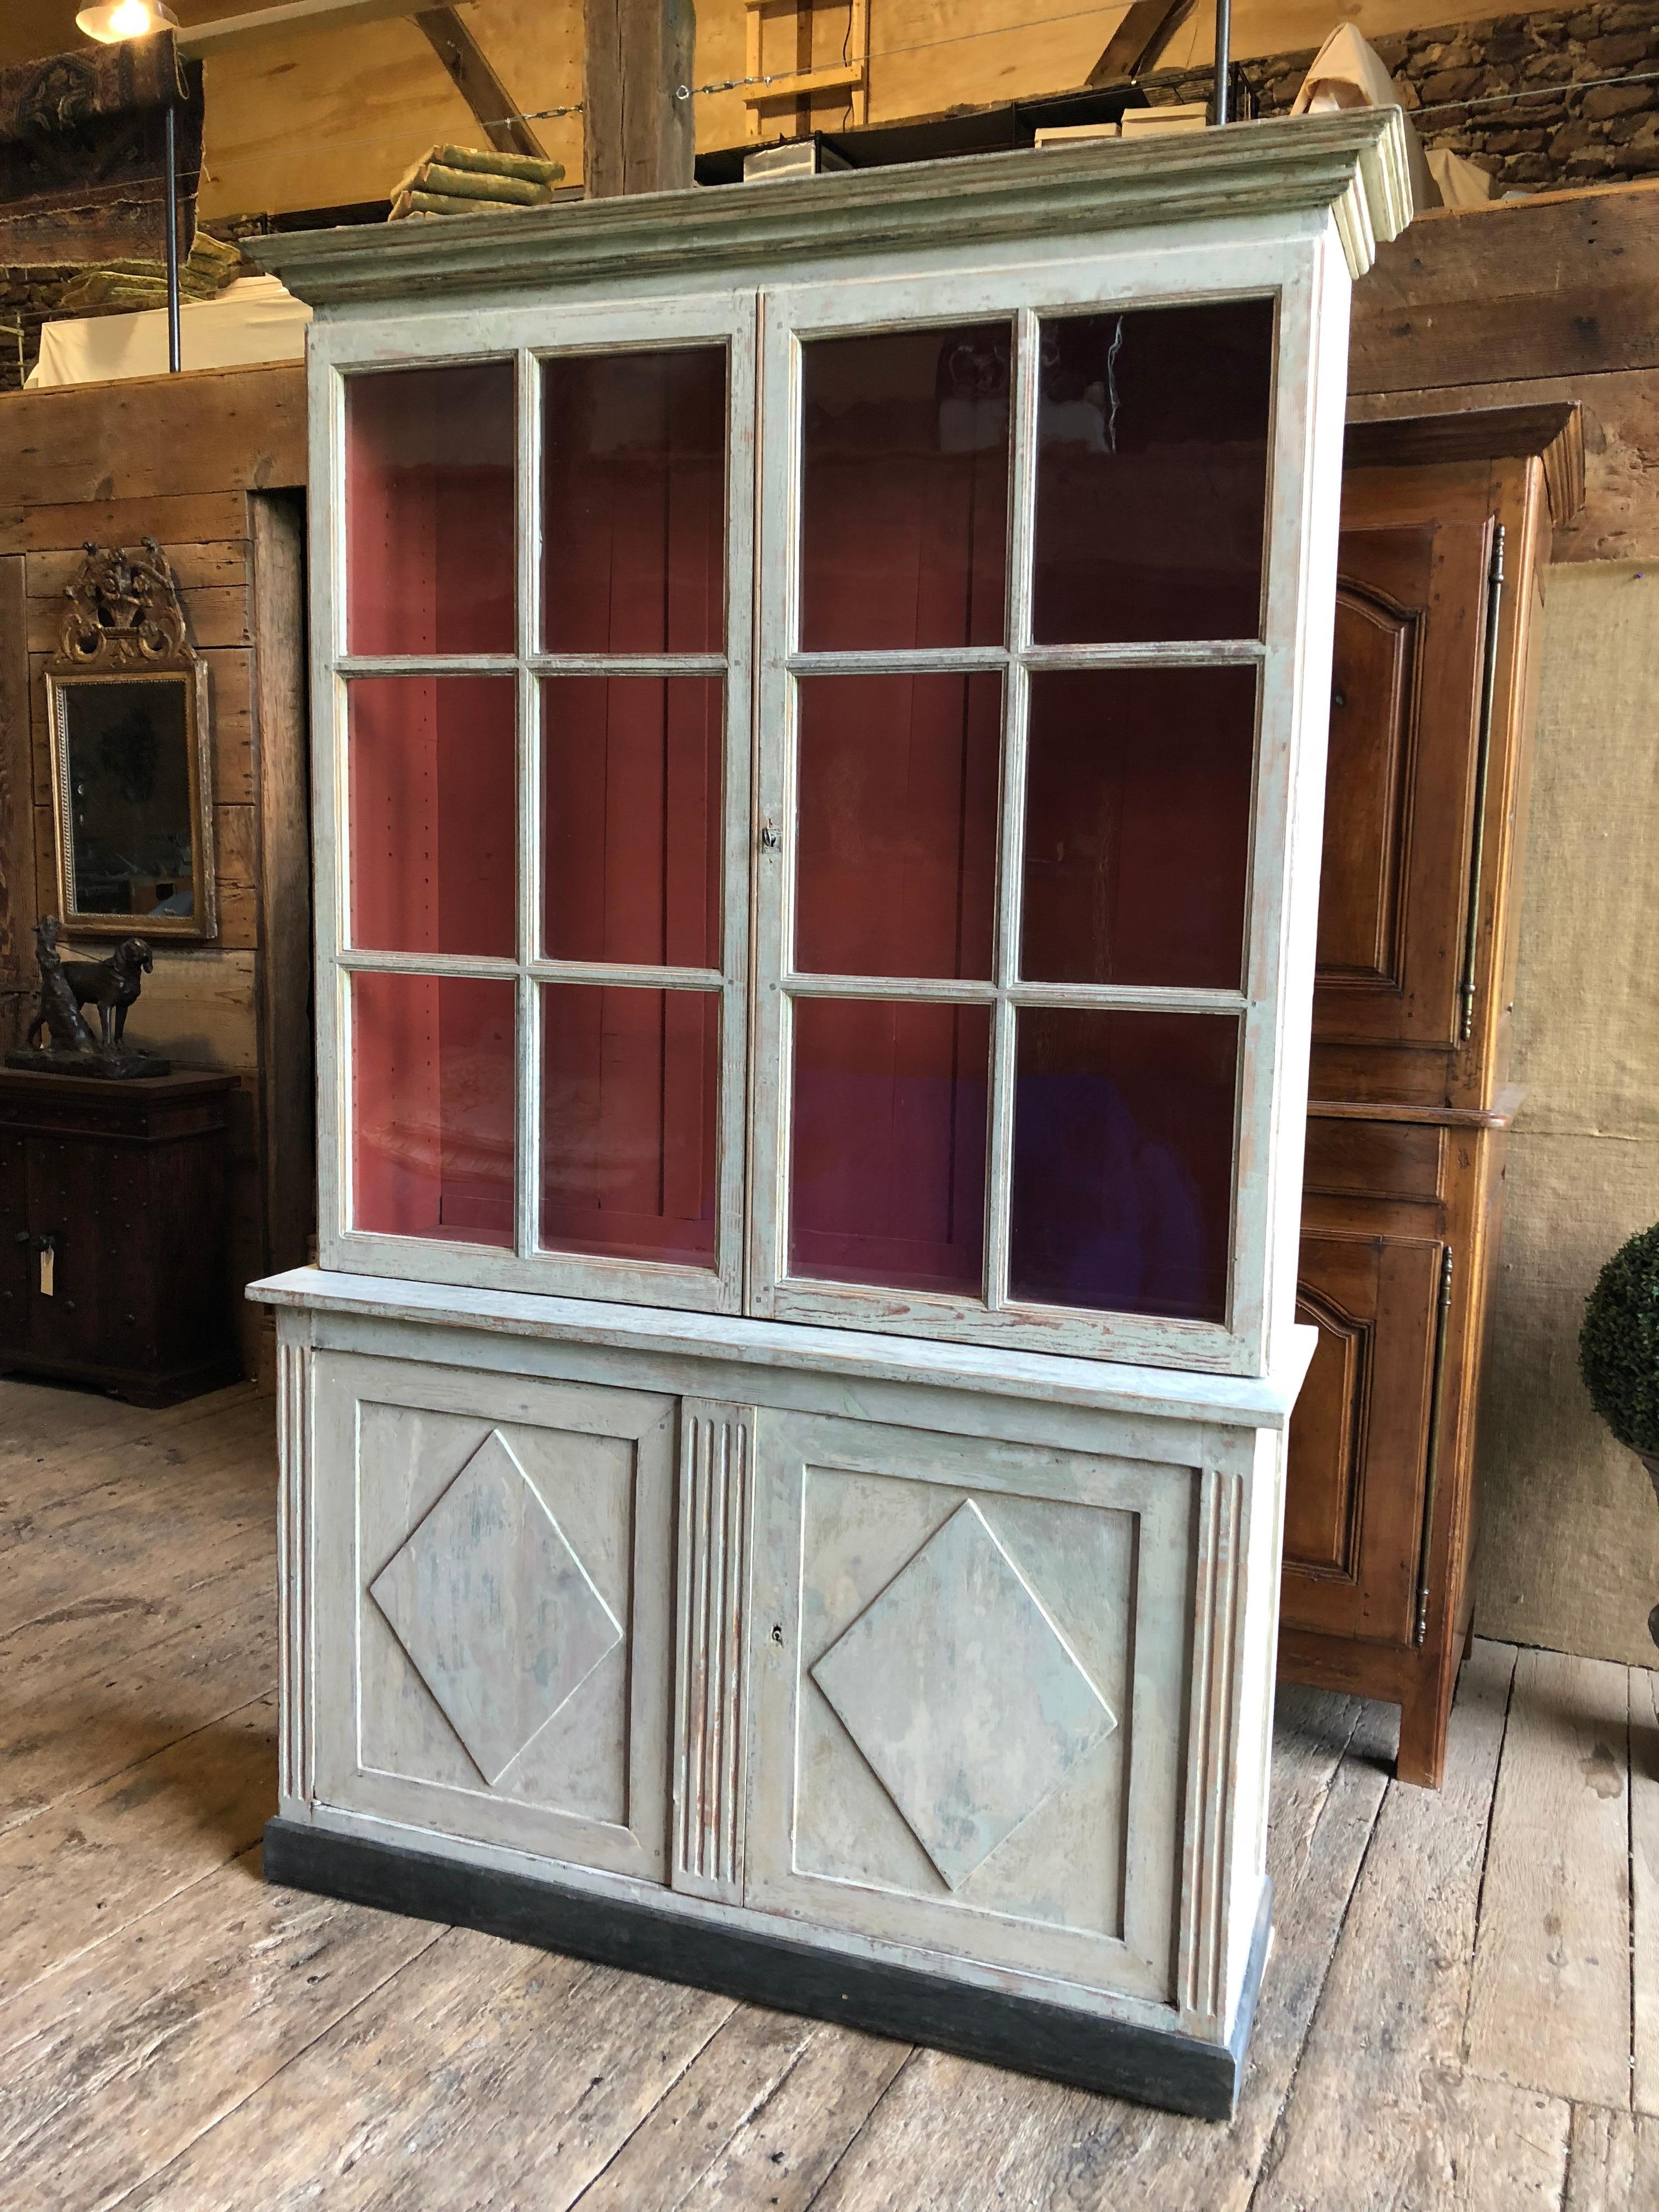 A wonderful and rare French Directoire Period bookcase cabinet in 2-parts, circa 1800, hand-scraped to its original grey painted finish, and retaining its original wavy glass panes. 
The lower cabinet has a single shelf and the doors are decorated